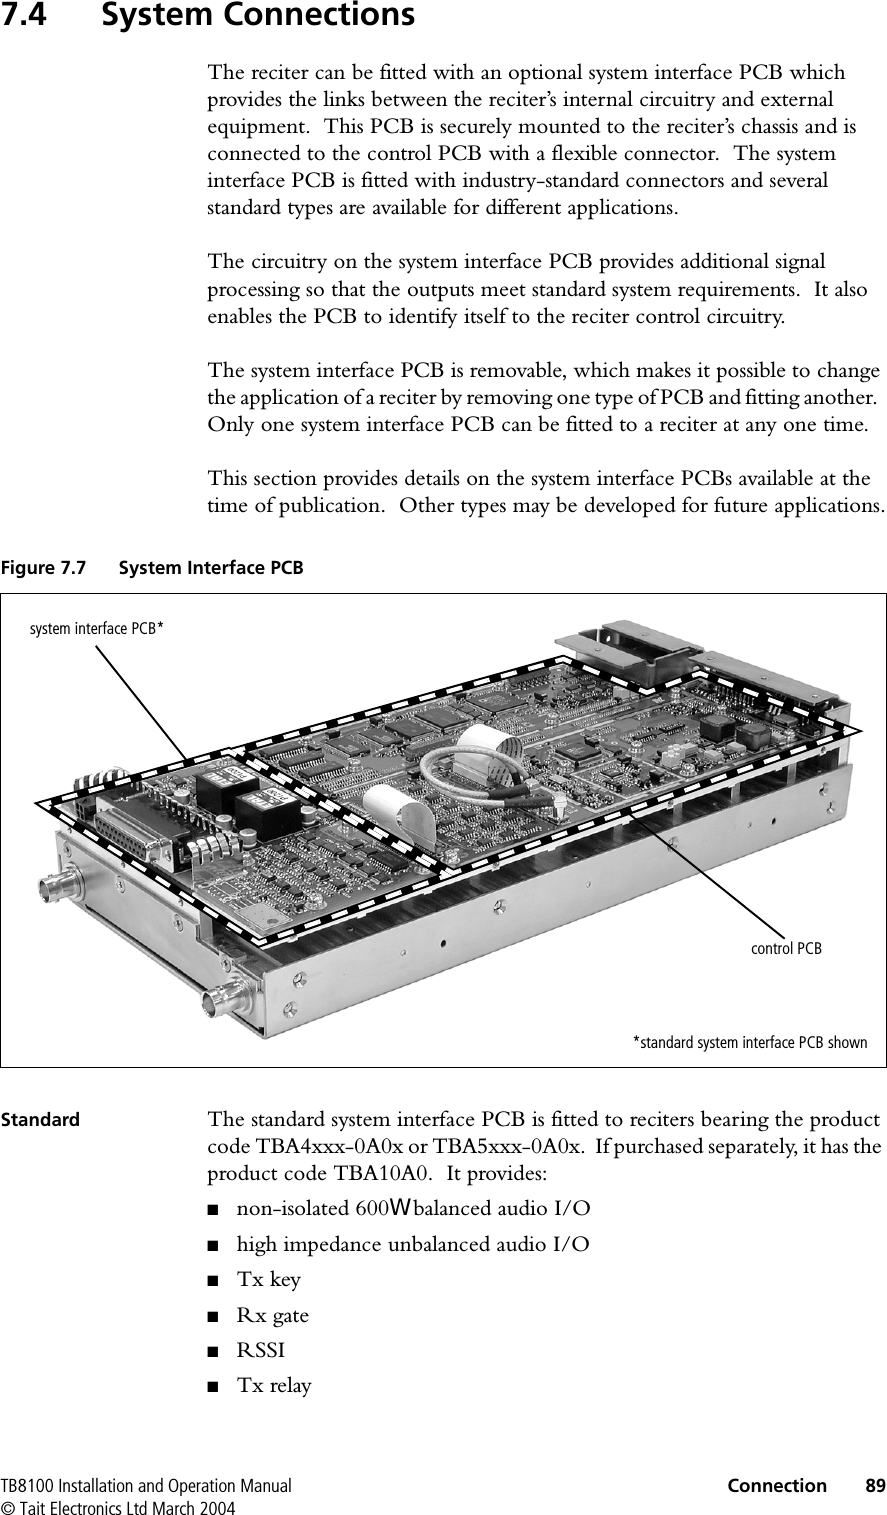 TB8100 Installation and Operation Manual Connection 89© Tait Electronics Ltd March 20047.4 System ConnectionsThe reciter can be fitted with an optional system interface PCB which provides the links between the reciter’s internal circuitry and external equipment.  This PCB is securely mounted to the reciter’s chassis and is connected to the control PCB with a flexible connector.  The system interface PCB is fitted with industry-standard connectors and several standard types are available for different applications.The circuitry on the system interface PCB provides additional signal processing so that the outputs meet standard system requirements.  It also enables the PCB to identify itself to the reciter control circuitry.The system interface PCB is removable, which makes it possible to change the application of a reciter by removing one type of PCB and fitting another.  Only one system interface PCB can be fitted to a reciter at any one time.This section provides details on the system interface PCBs available at the time of publication.  Other types may be developed for future applications.Standard The standard system interface PCB is fitted to reciters bearing the product code TBA4xxx-0A0x or TBA5xxx-0A0x.  If purchased separately, it has the product code TBA10A0.  It provides:■non-isolated 600: balanced audio I/O■high impedance unbalanced audio I/O■Tx key■Rx gate■RSSI■Tx relayFigure 7.7 System Interface PCBsystem interface PCB*control PCB*standard system interface PCB shown